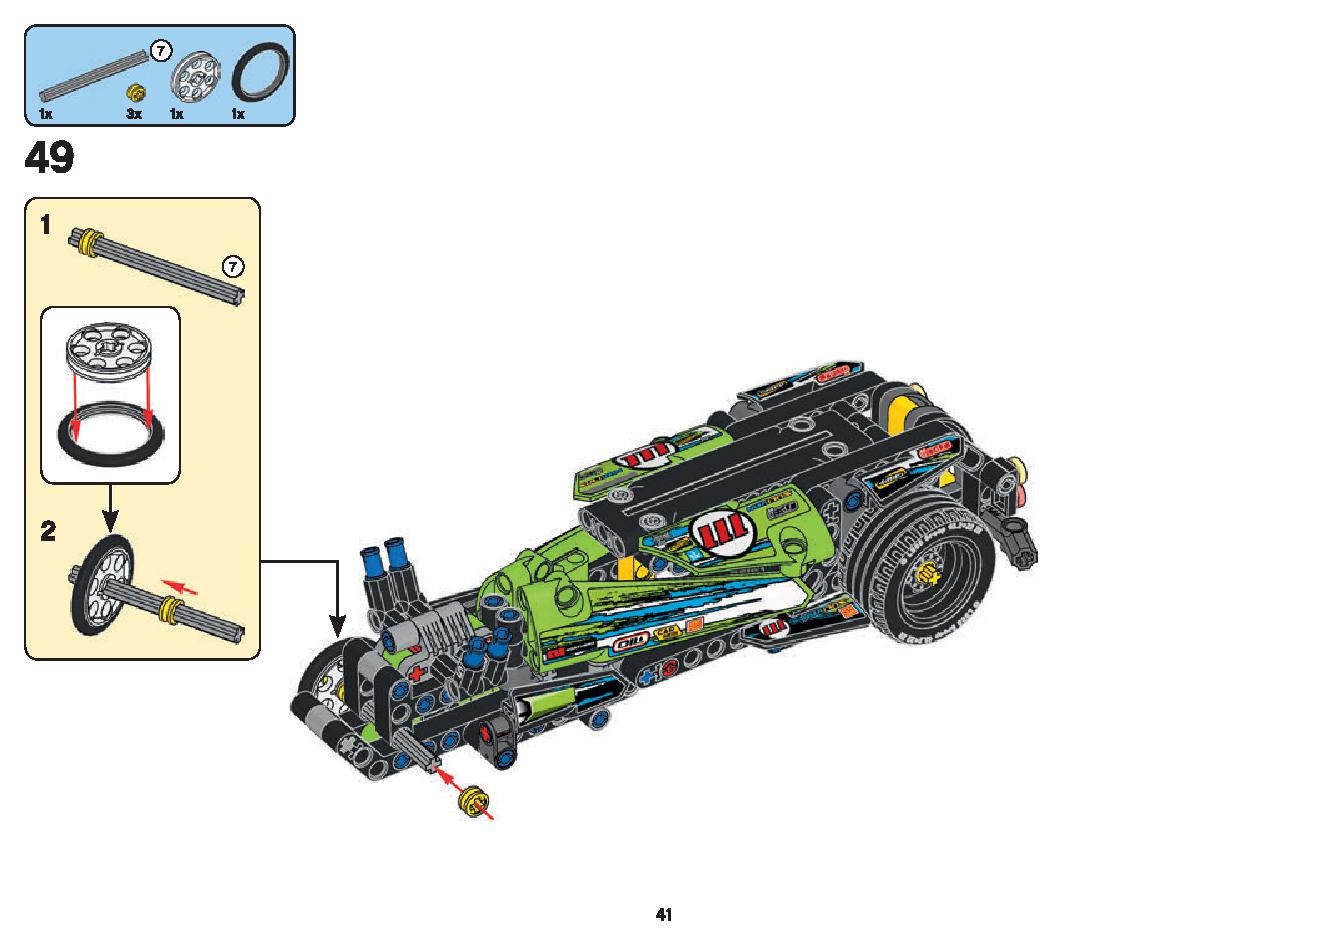 Dragster 42103 LEGO information LEGO instructions 41 page